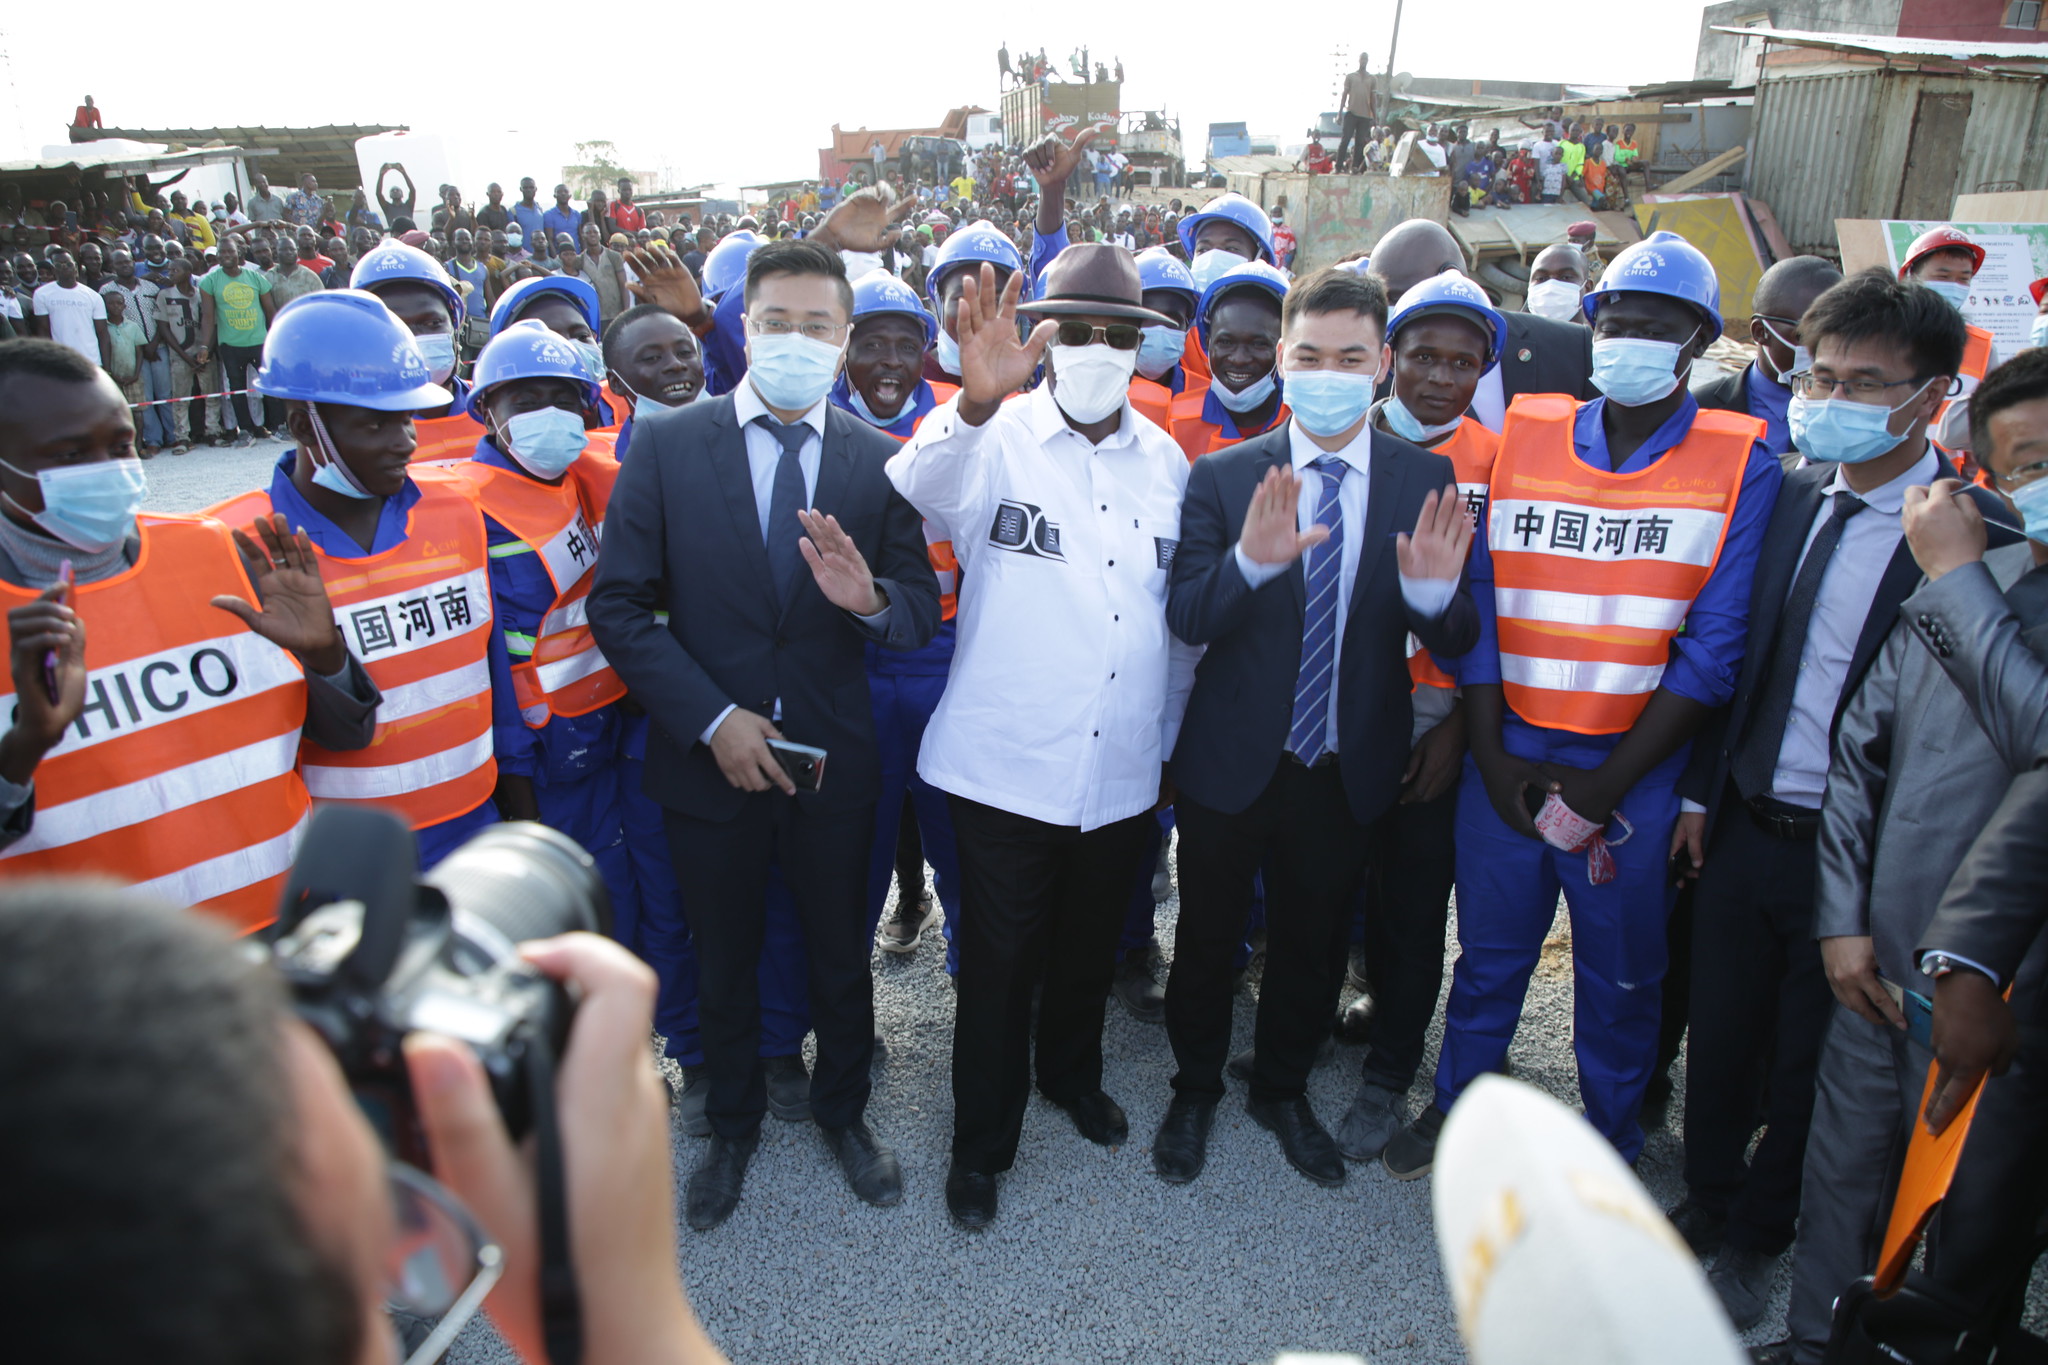 Official launch of works to widen the EAST exit of Abidjan